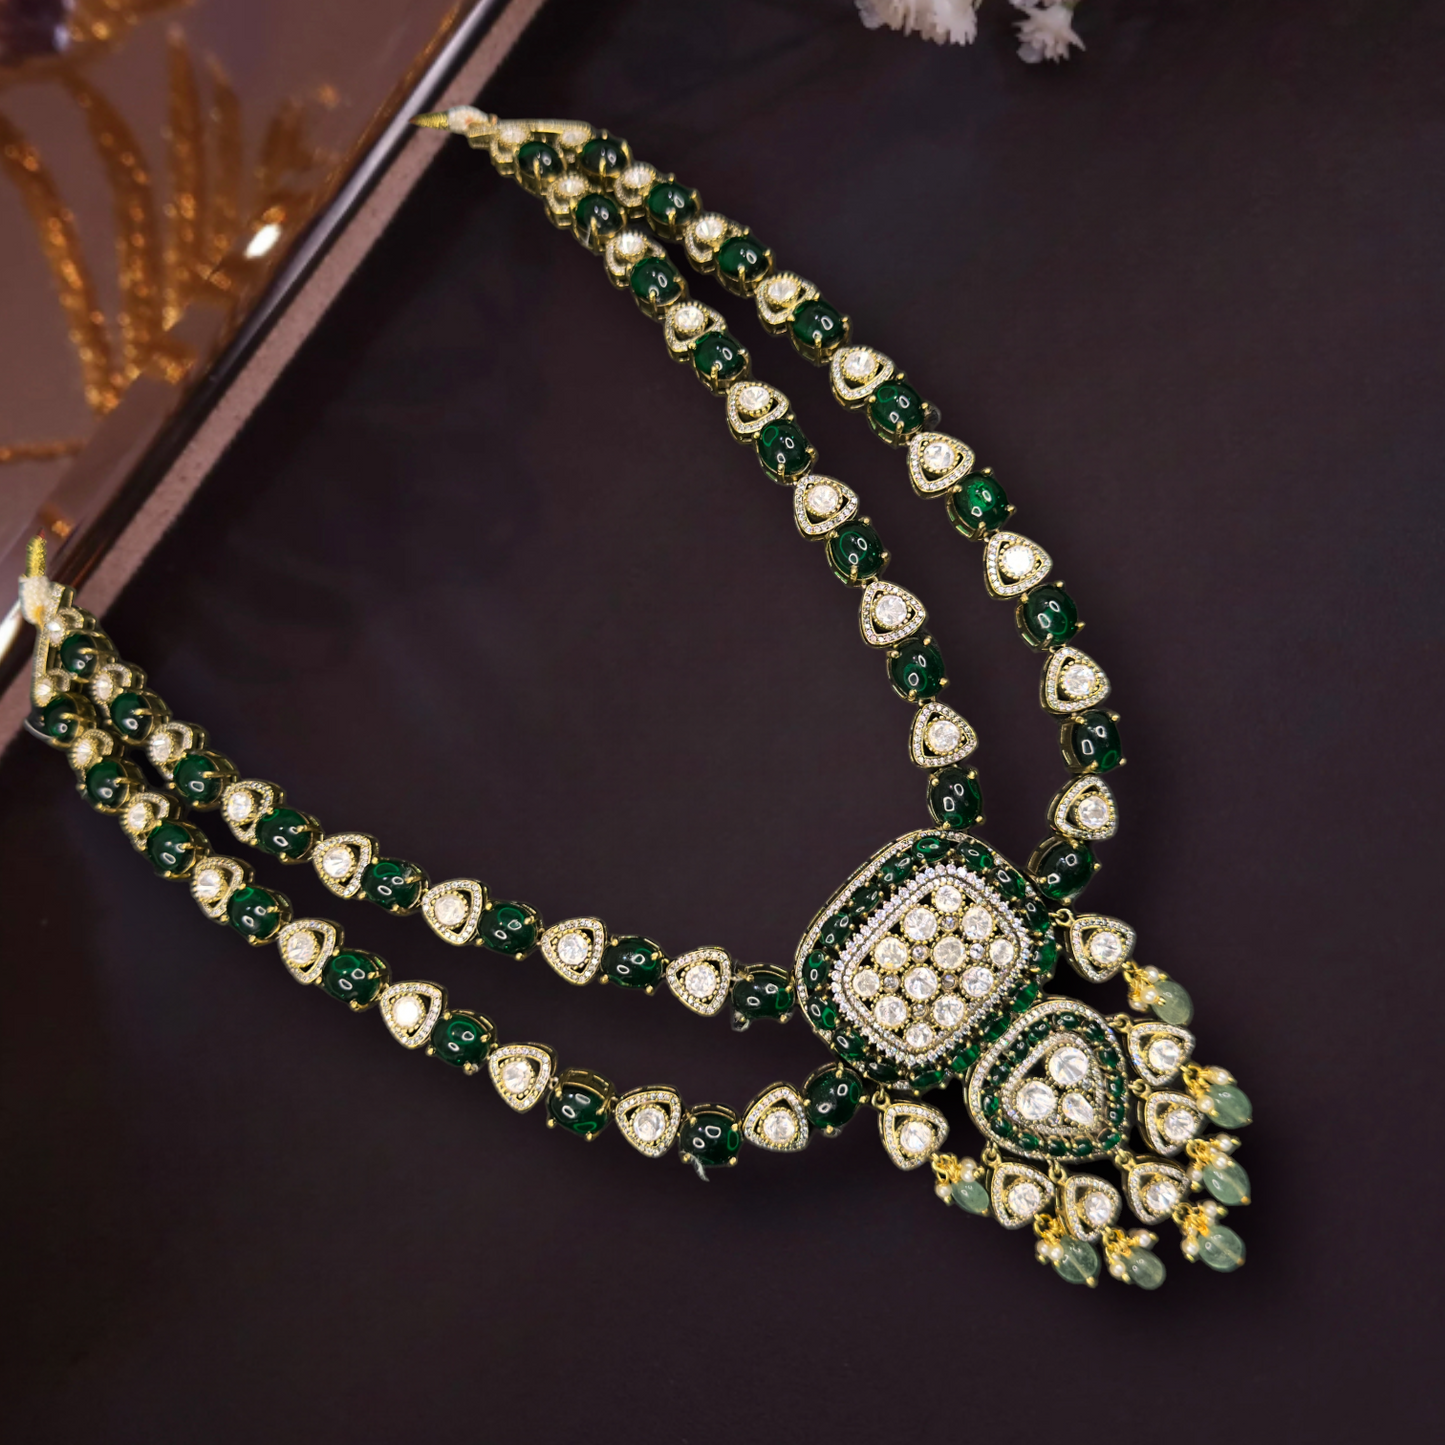 Elegant Two-Layer Victorian Necklace Set with Polki, zircon, pearls, and beads, including matching earrings. This Victorian Jewellery is available in Green & Purple colour variants. 